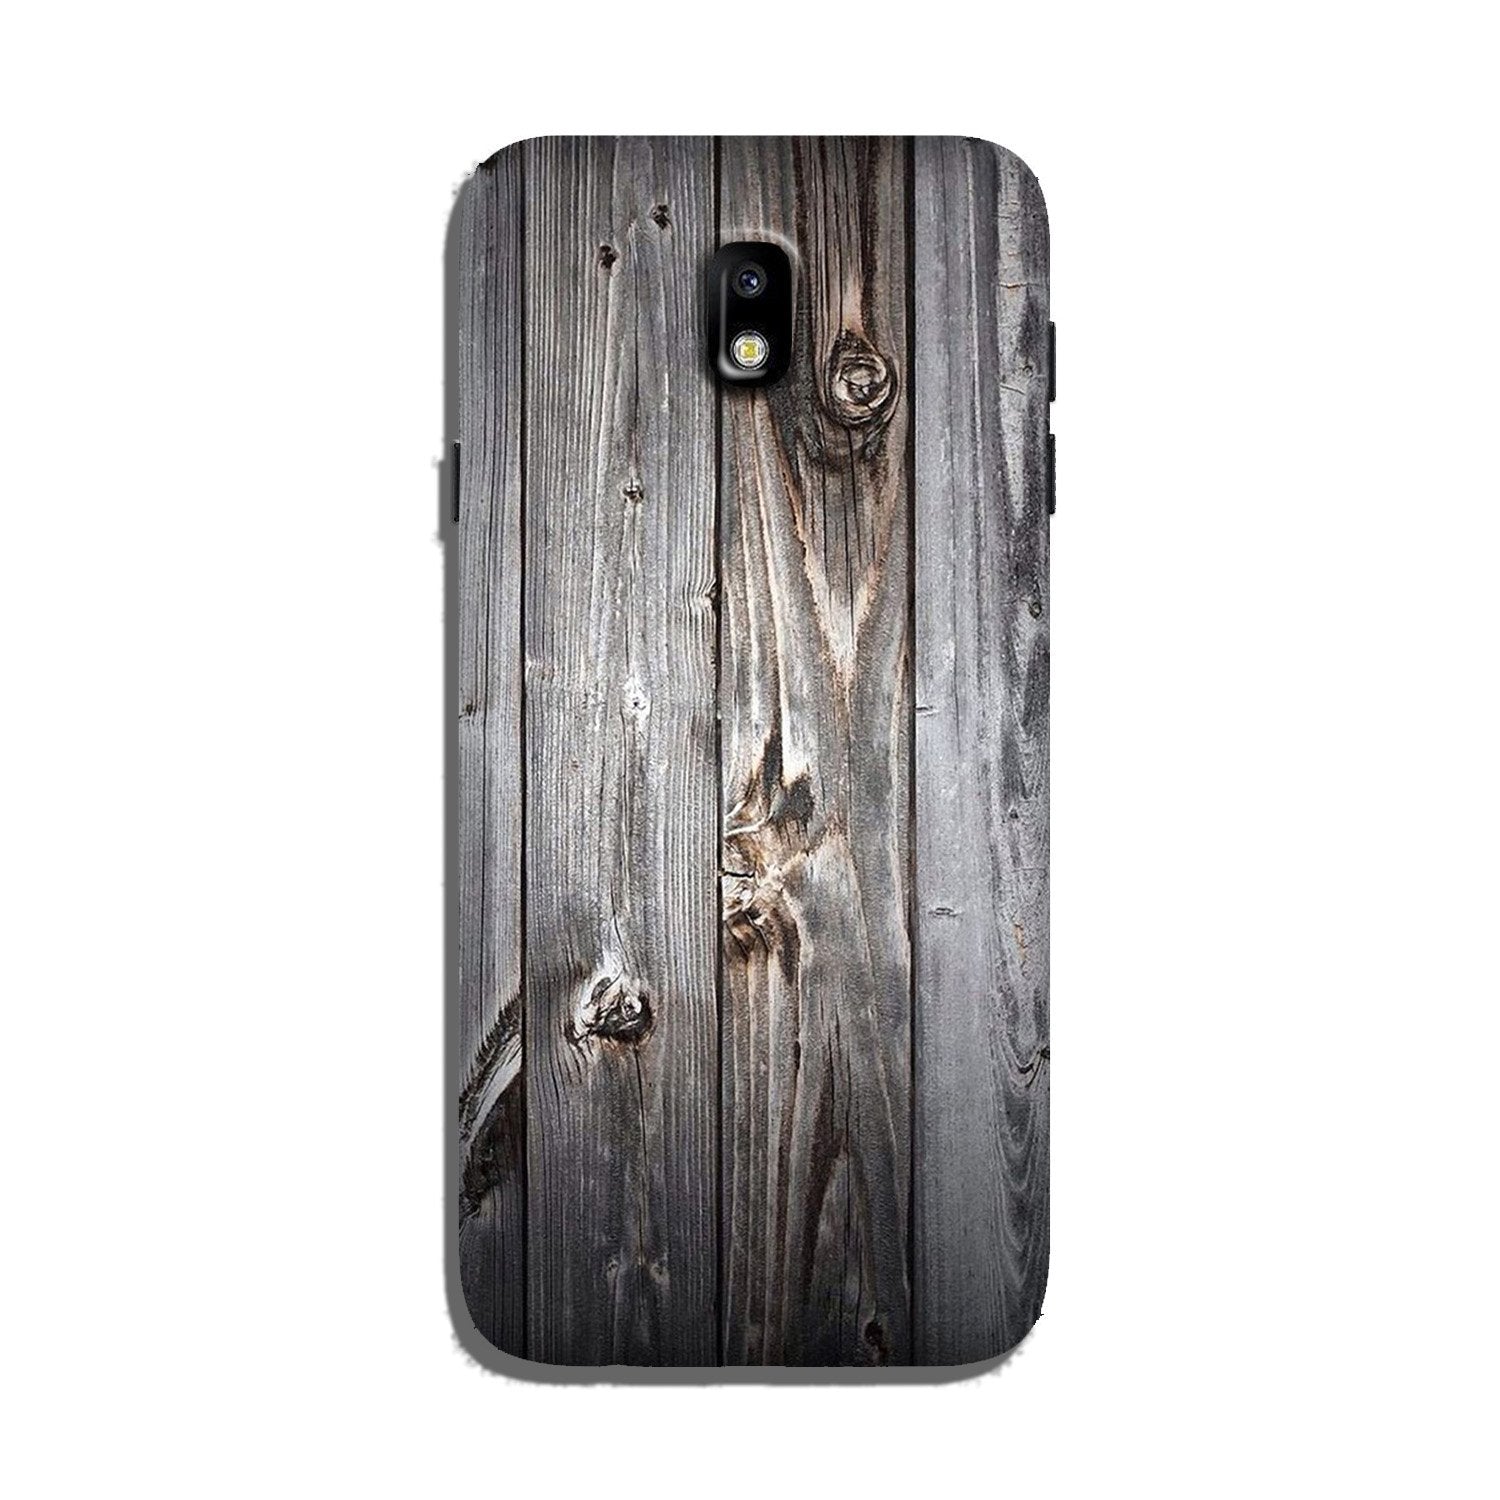 Wooden Look Case for Galaxy J7 Pro  (Design - 114)